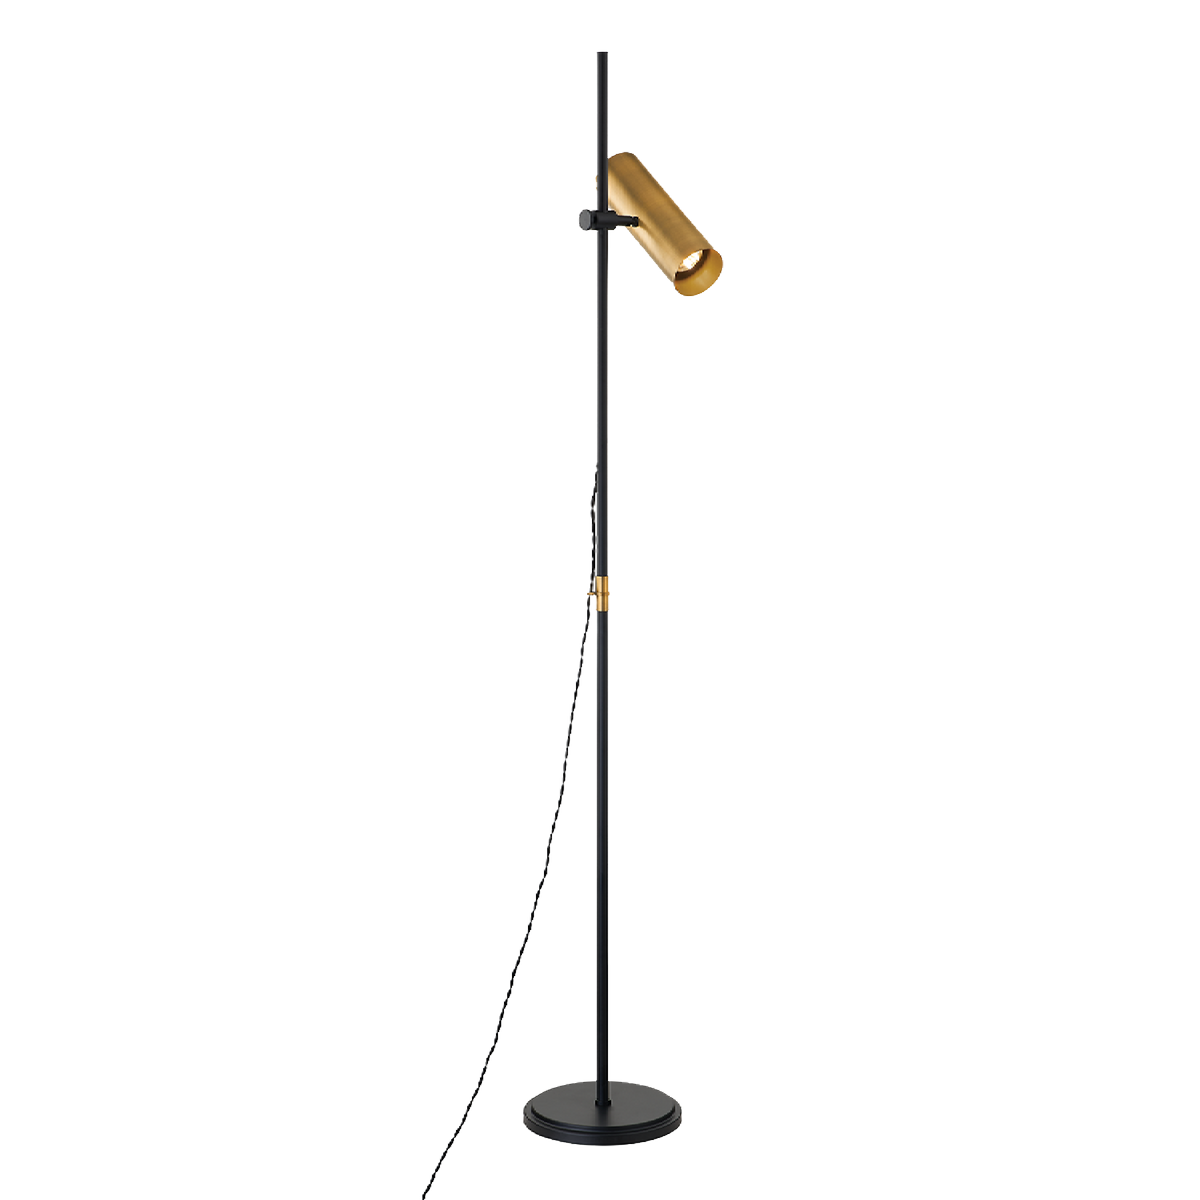 The Quinn Floor Lamp brings a chic industrial vibe to mid-century modern design.